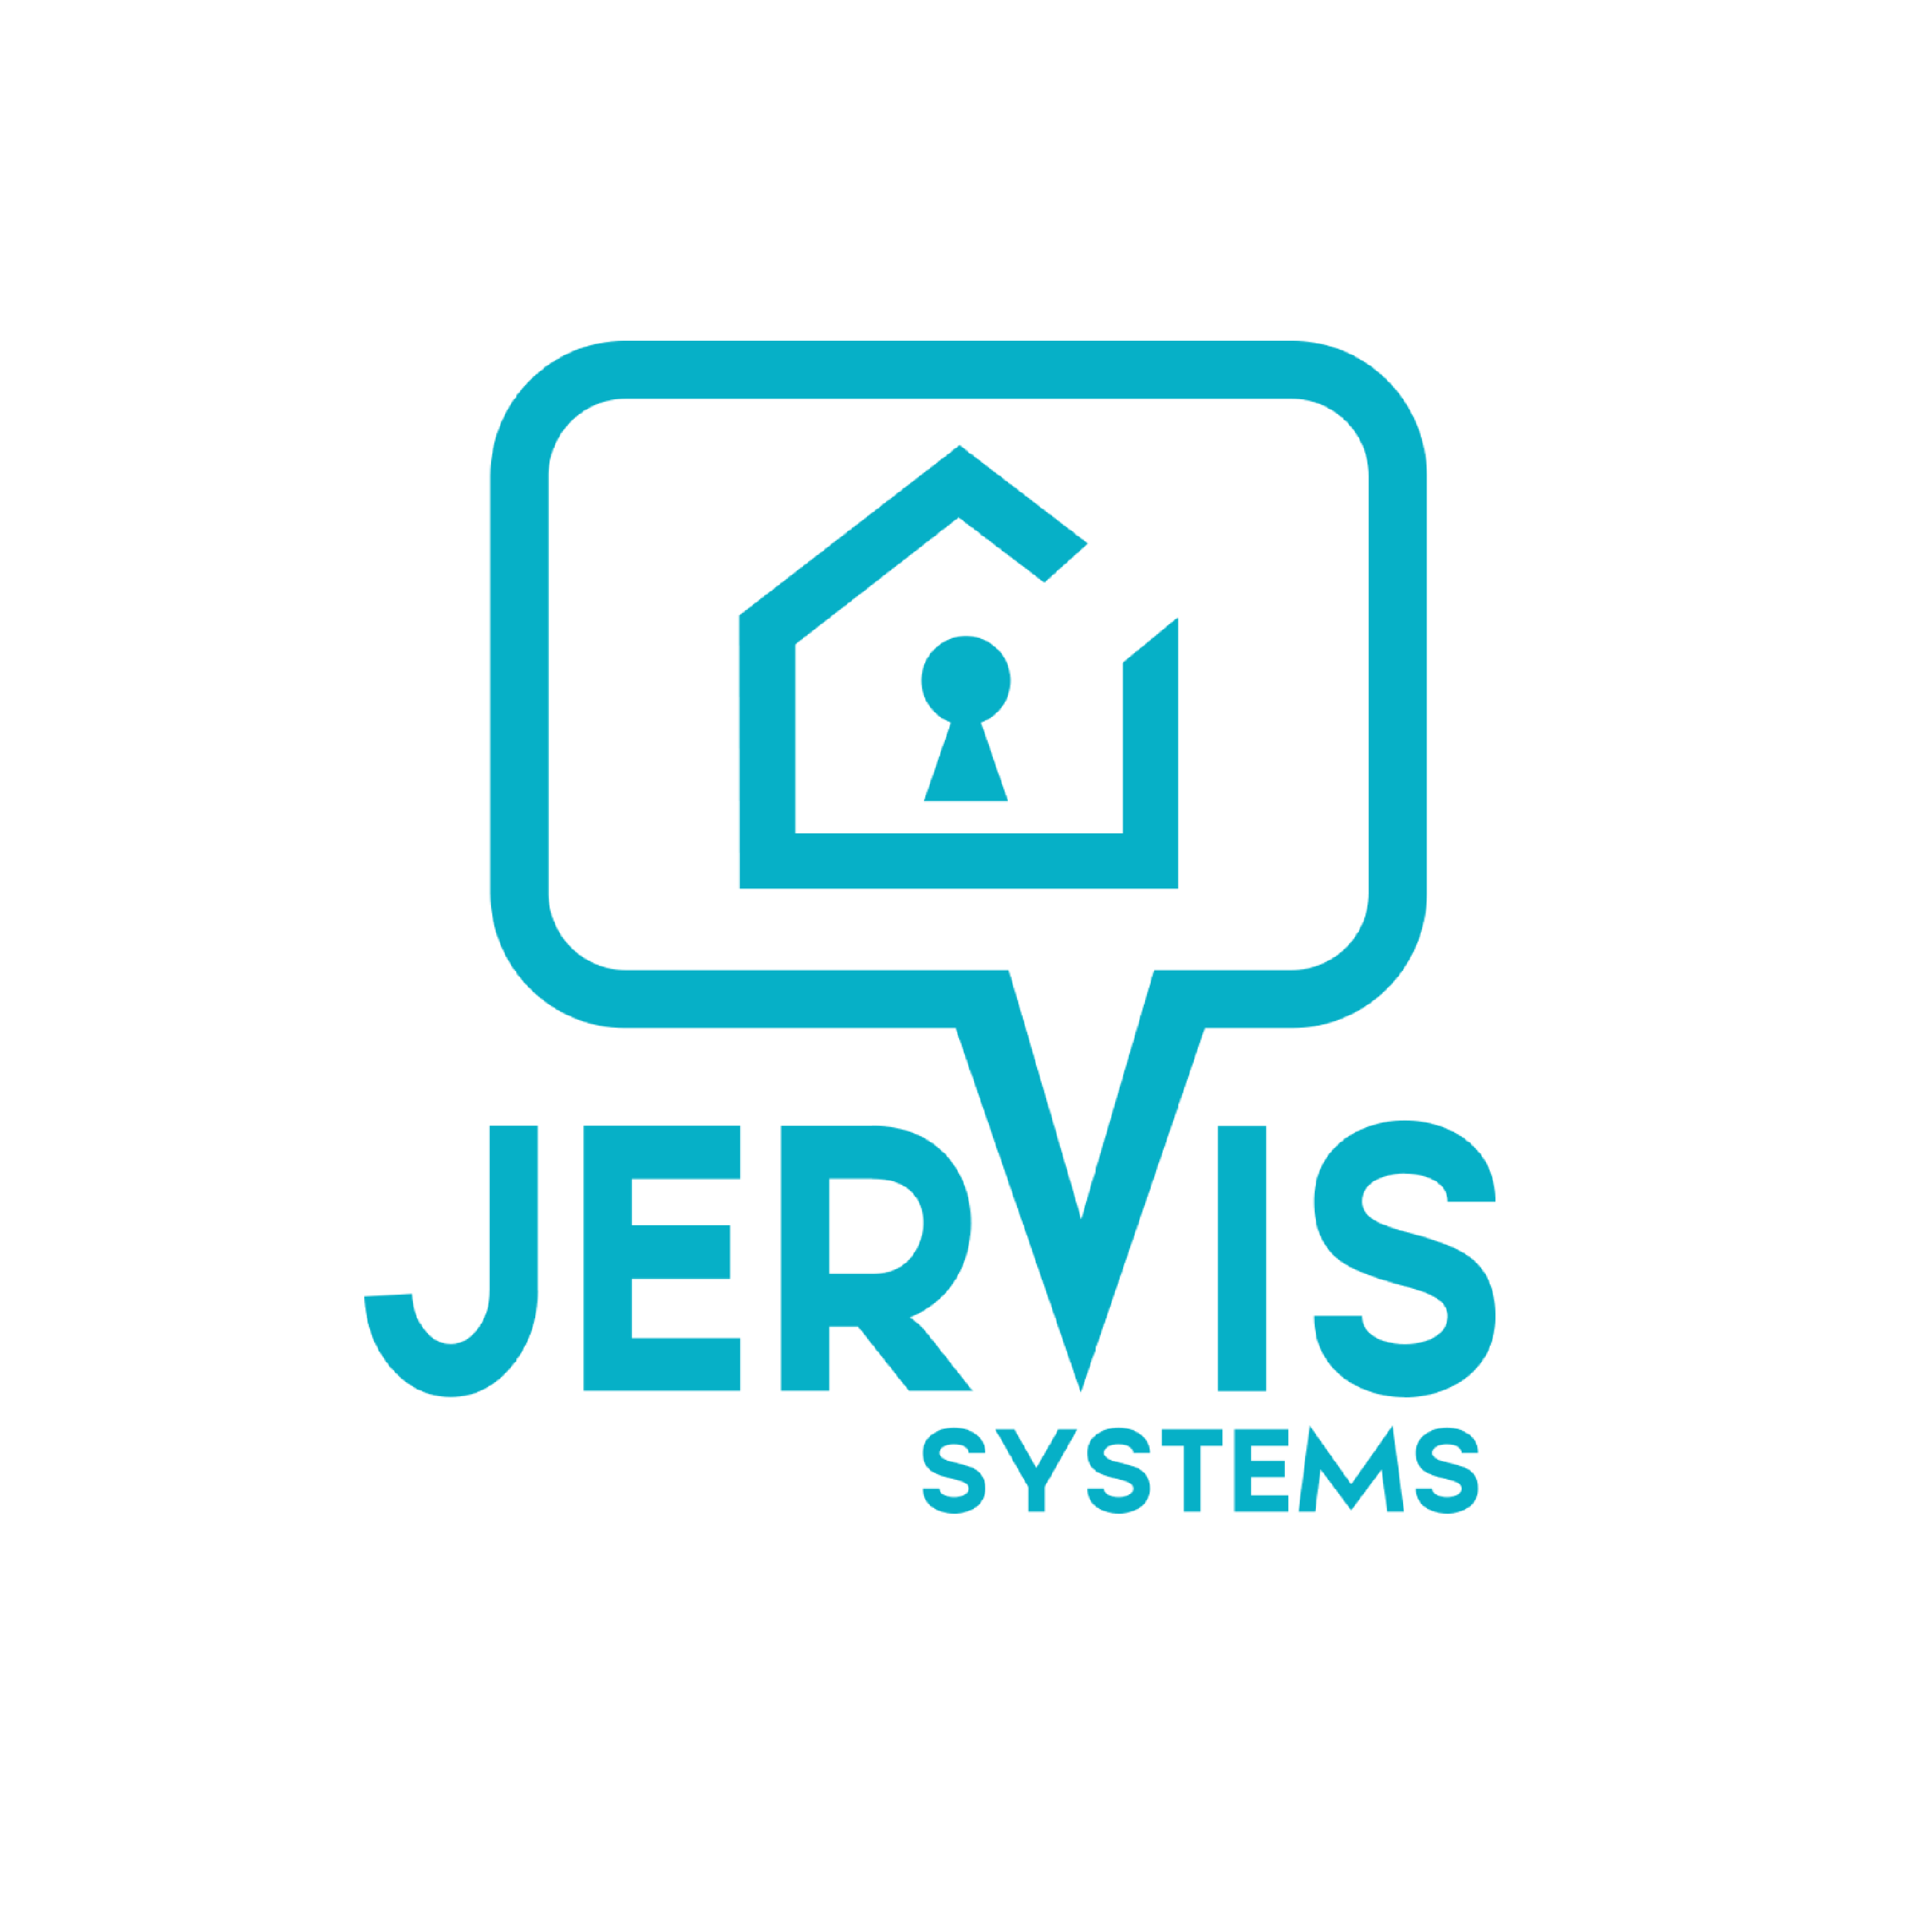 Tokeet integrates with Jervis Systems